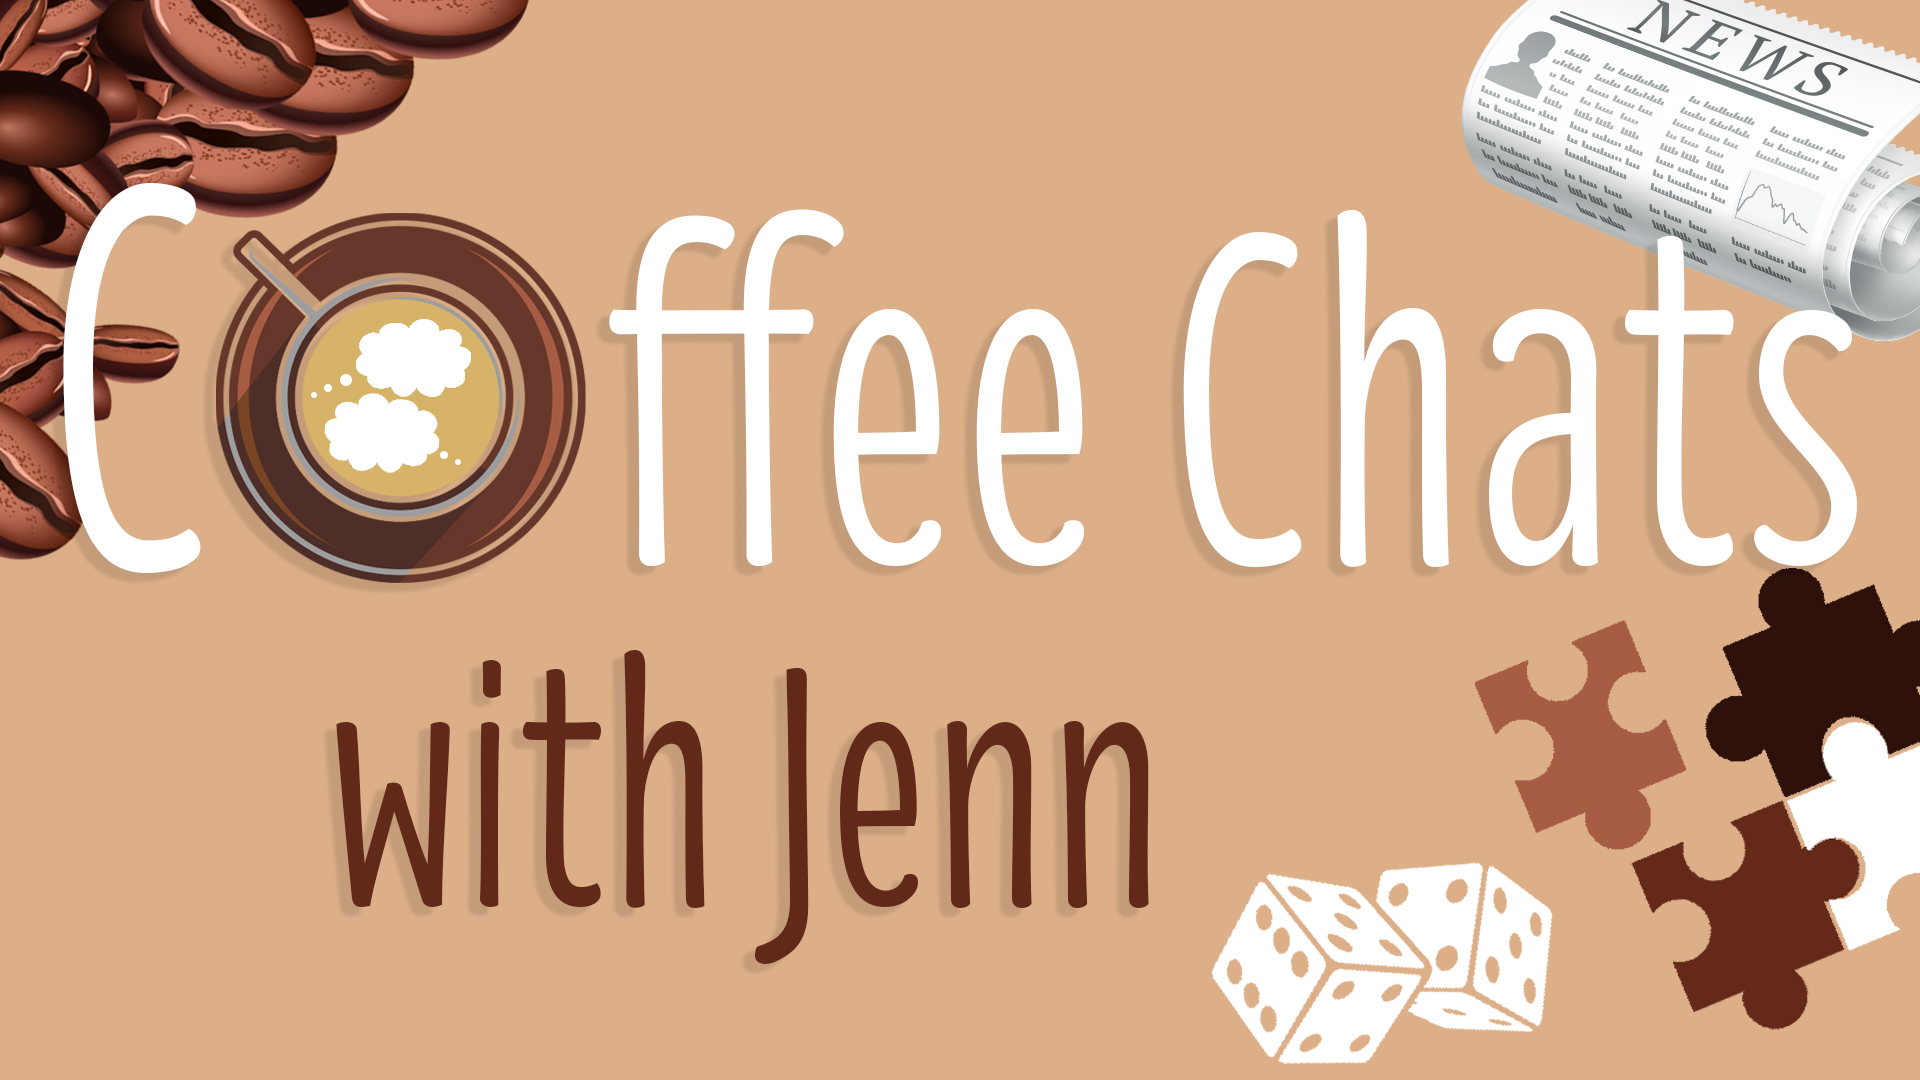 Image reads "Coffee Chats with Jenn" and the O is a coffee cup with conversation bubbles. To the left of the image are coffee beans and to the right of the image are dice, a newspaper, and puzzle pieces.